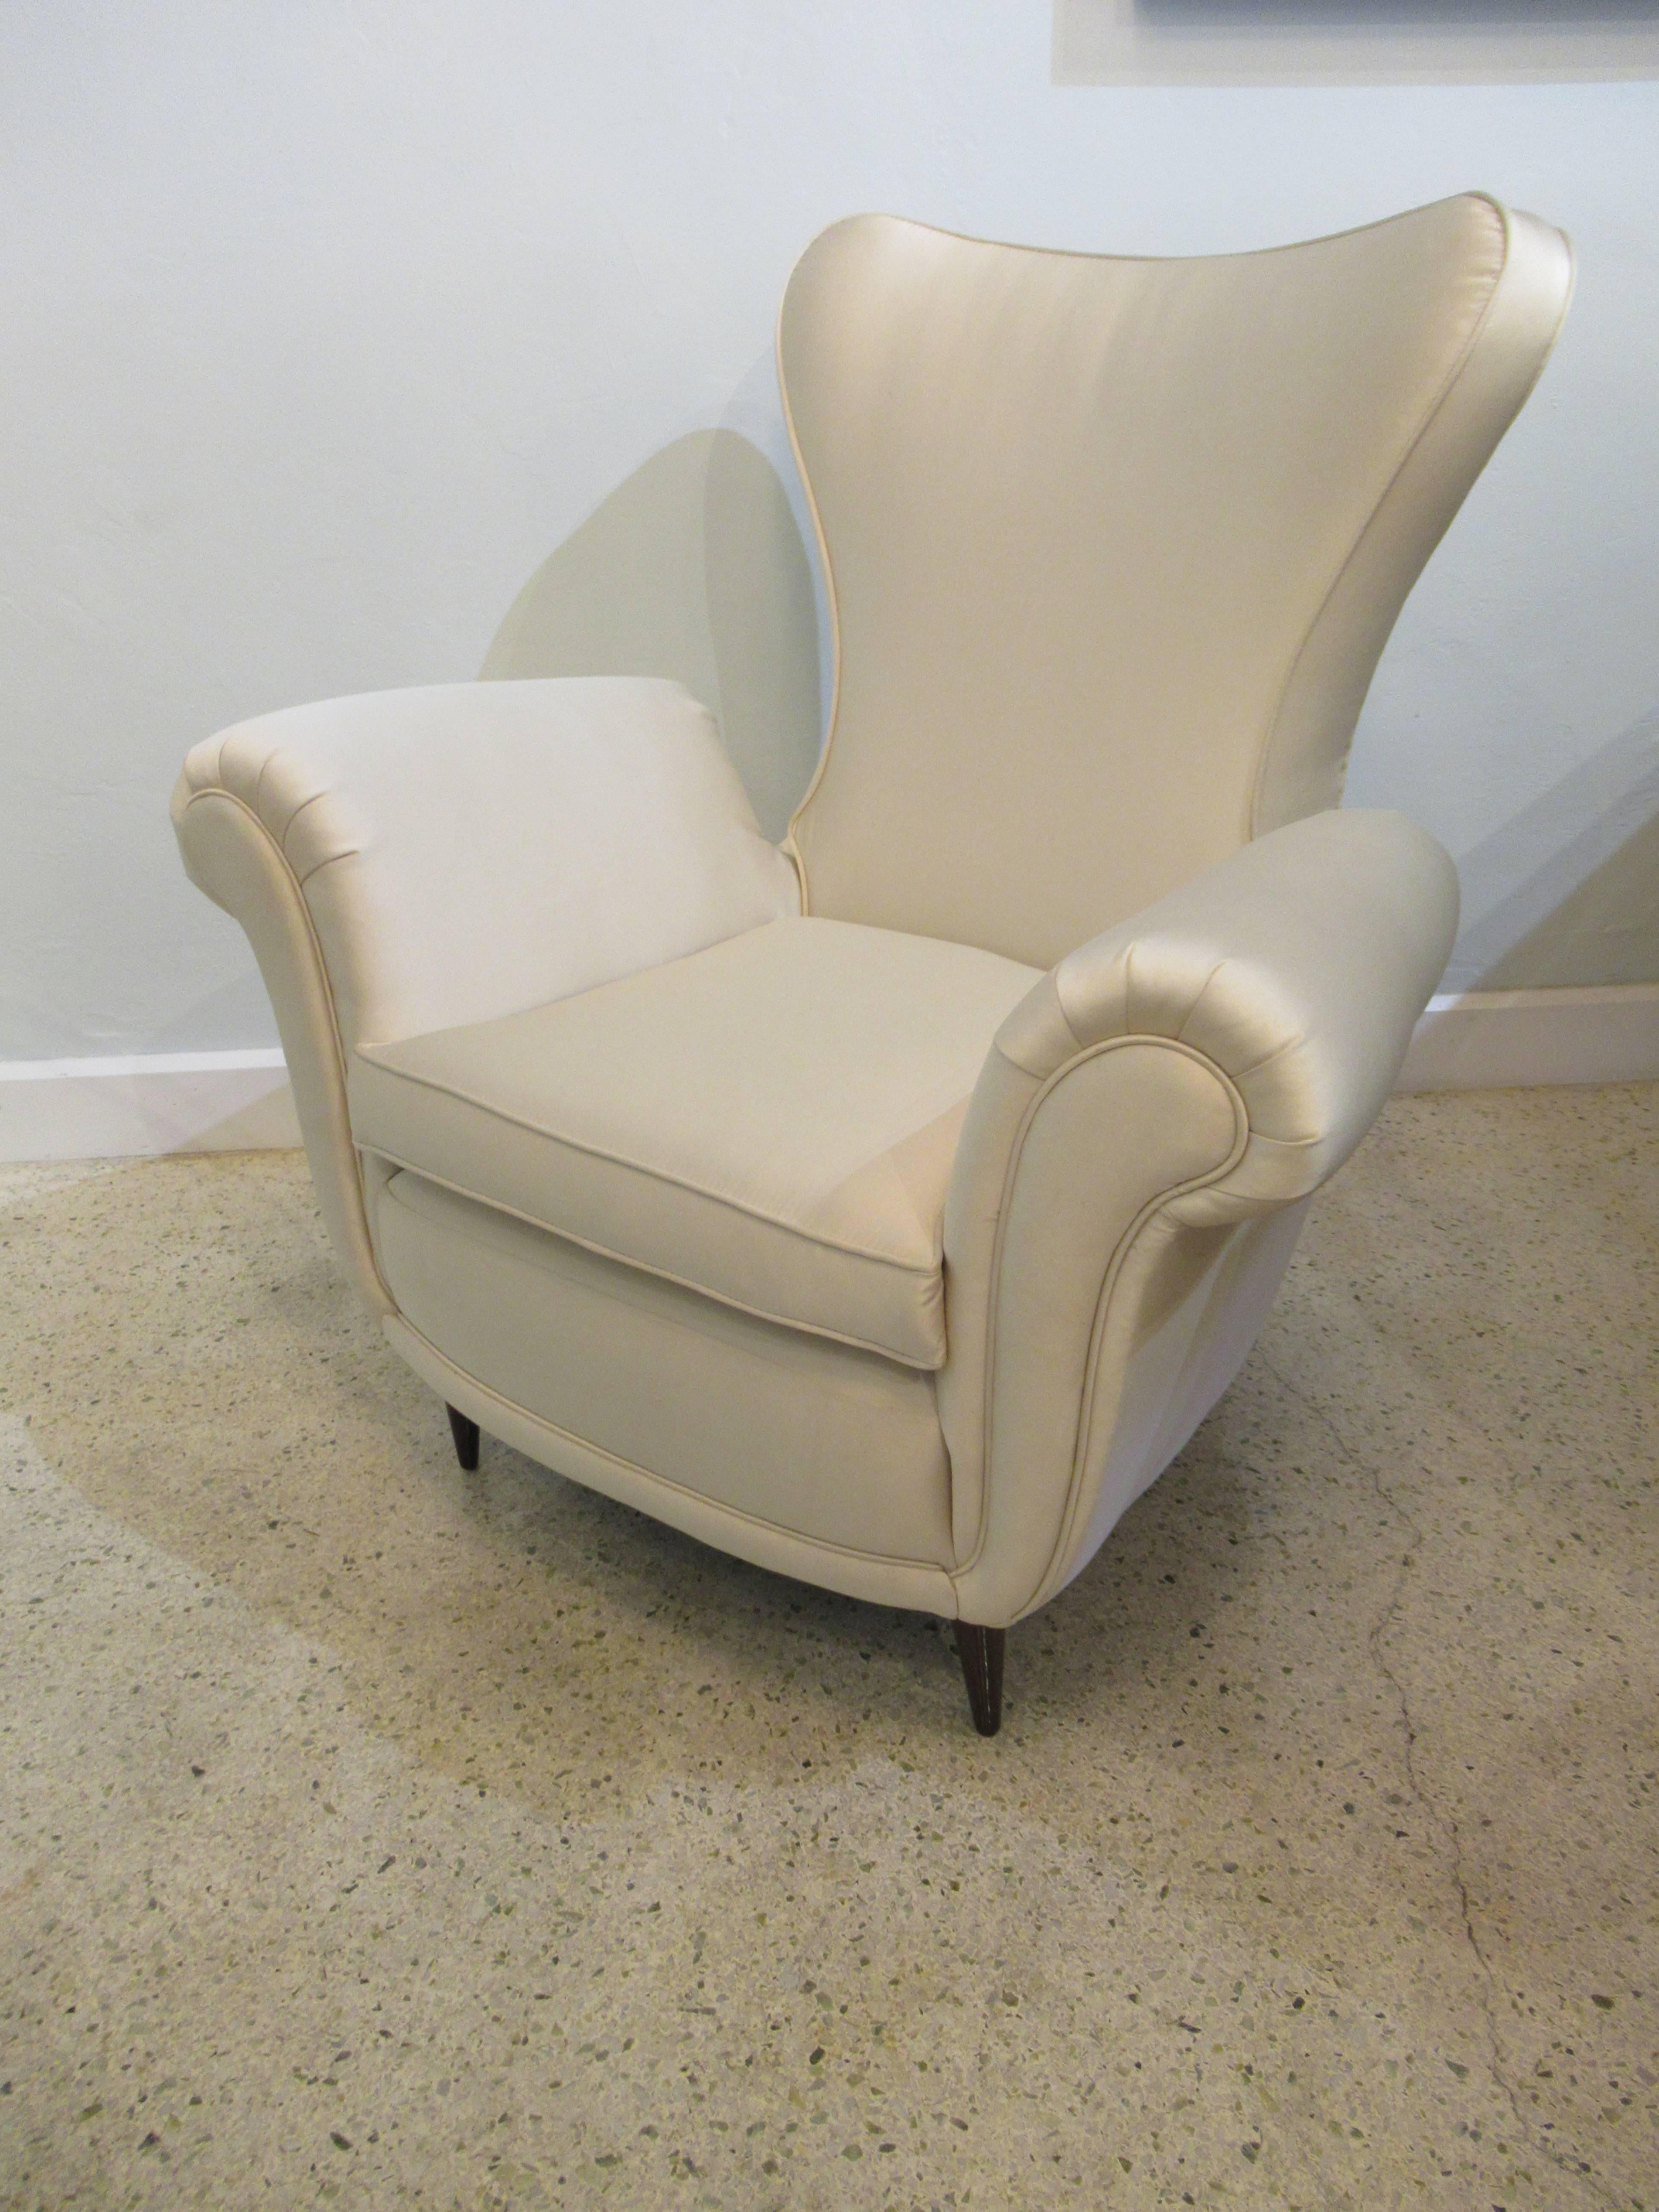 Italian Modern Upholstered Scrolled Arm Occasional Chair, Paolo Buffa, 1950's For Sale 2